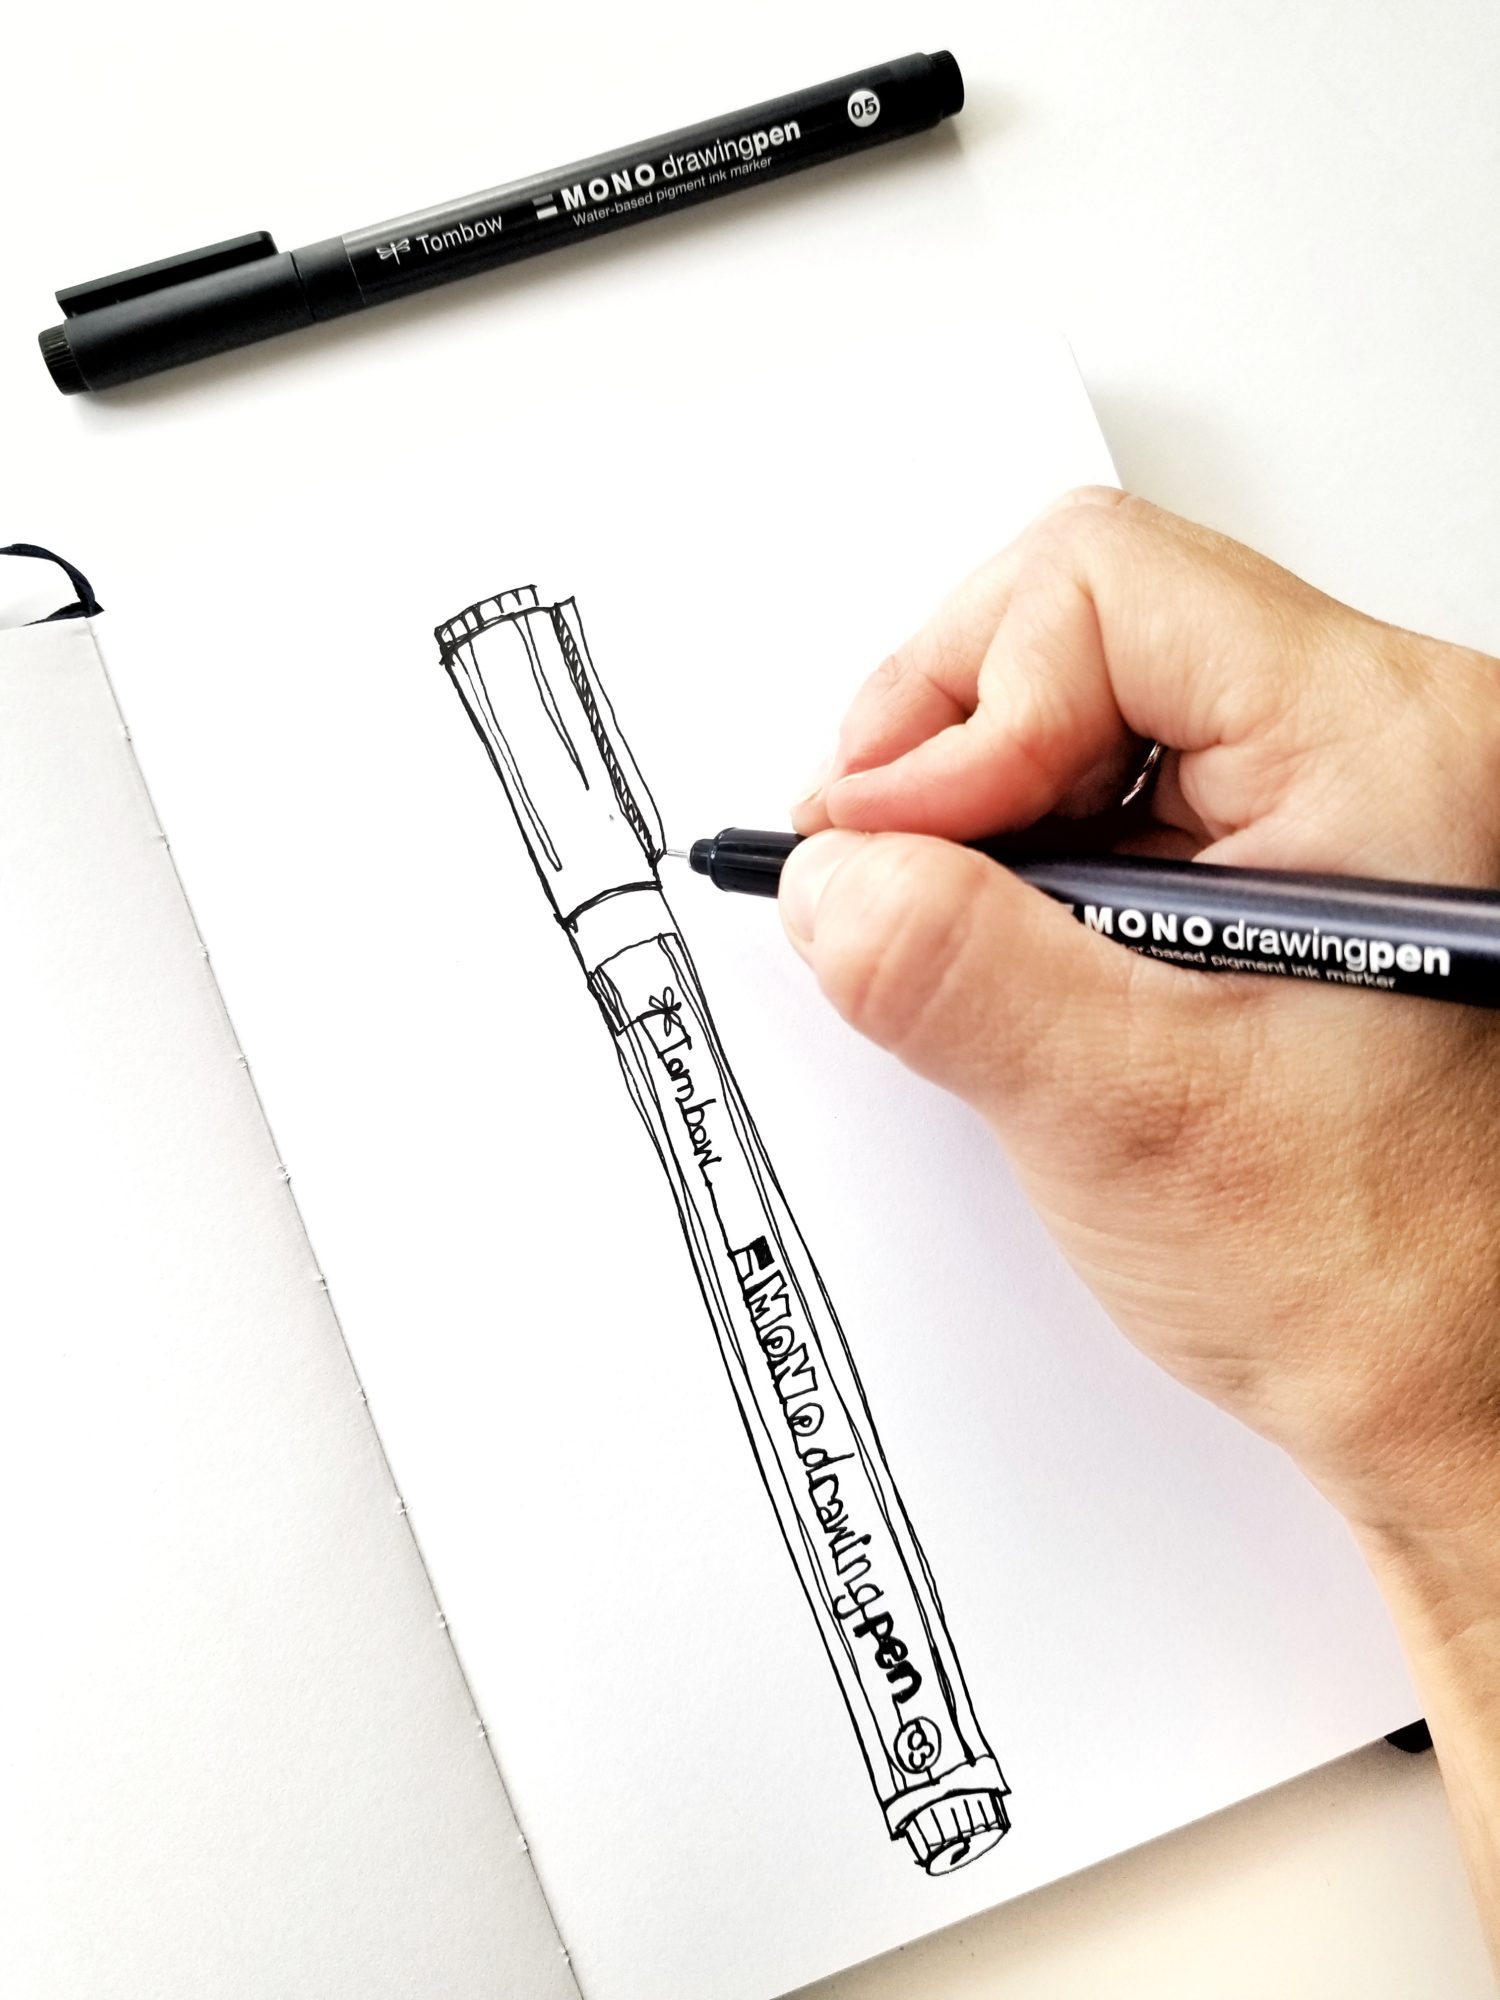 Use @tombowusa MONO Drawing Pens for continuous line drawing with @graceannestudio!